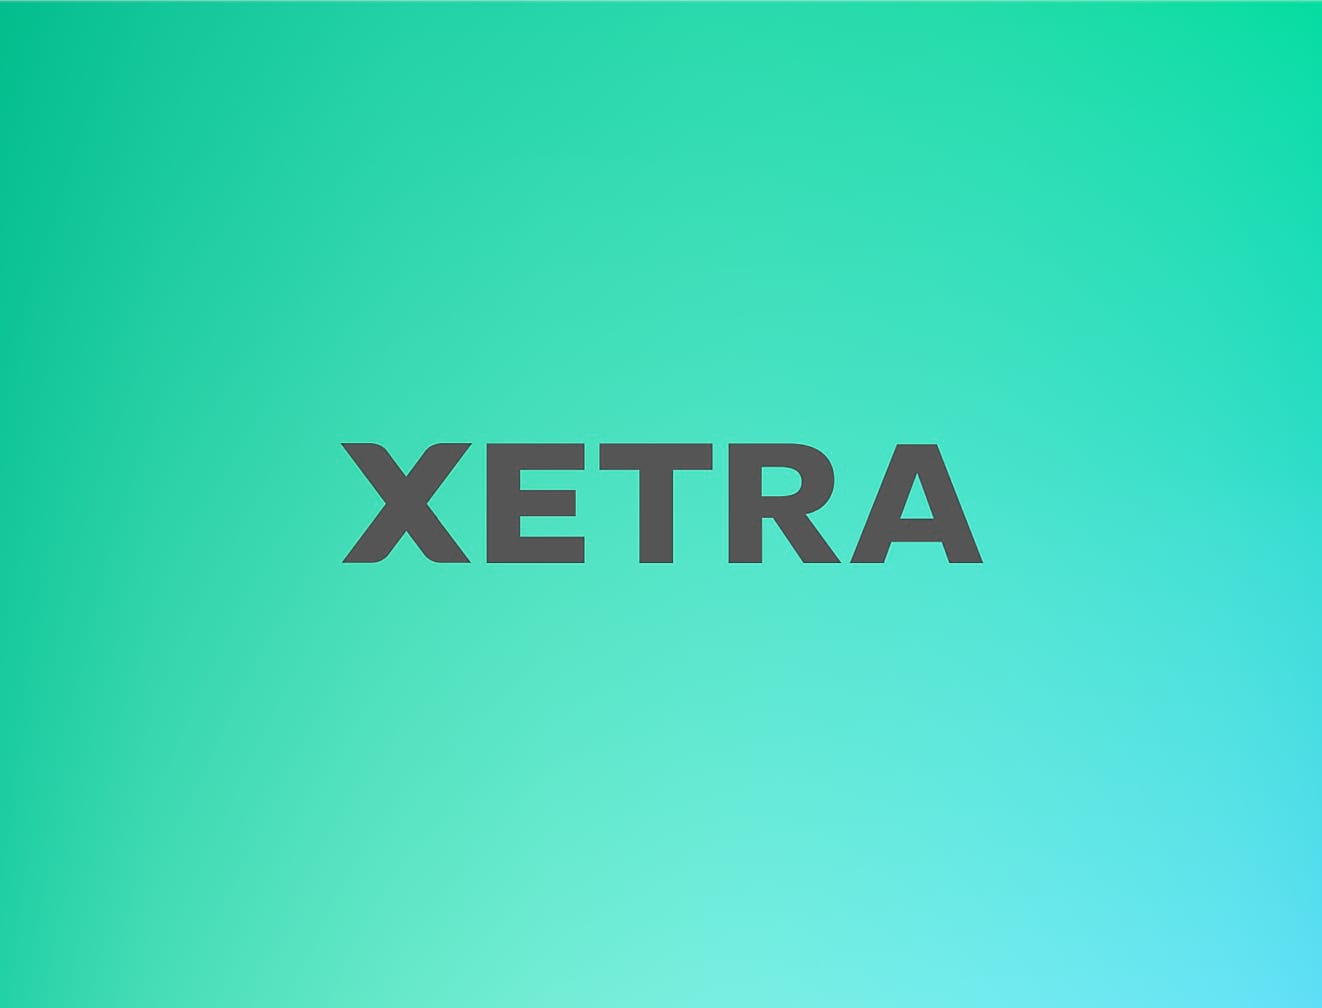 Issuer of the world’s most traded Bitcoin ETP to launch five new digital asset backed products
		on XETRAs 2021